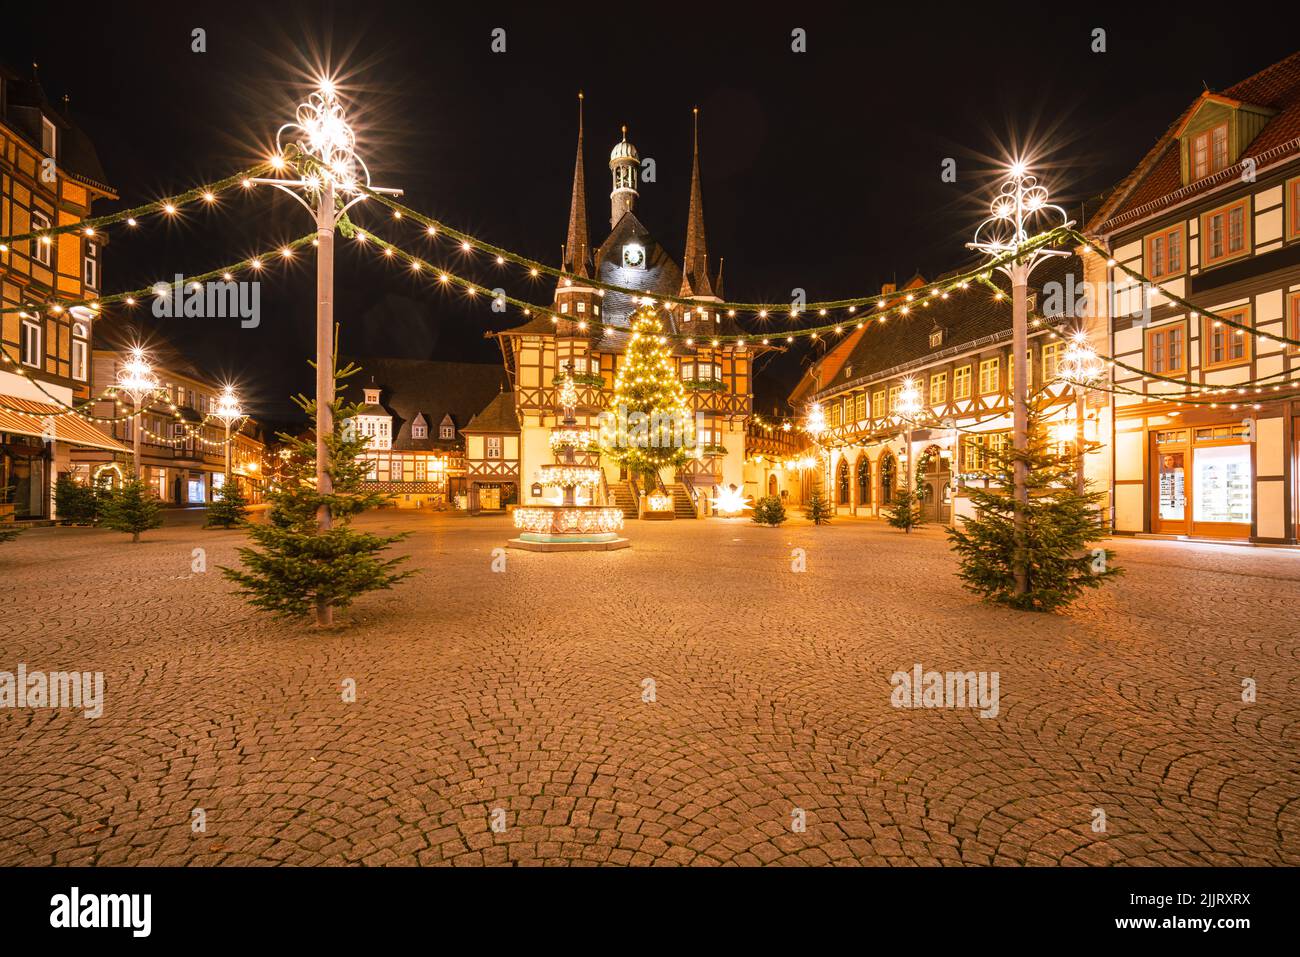 Wernigerode city center with town hall at Christmas time at night Stock Photo